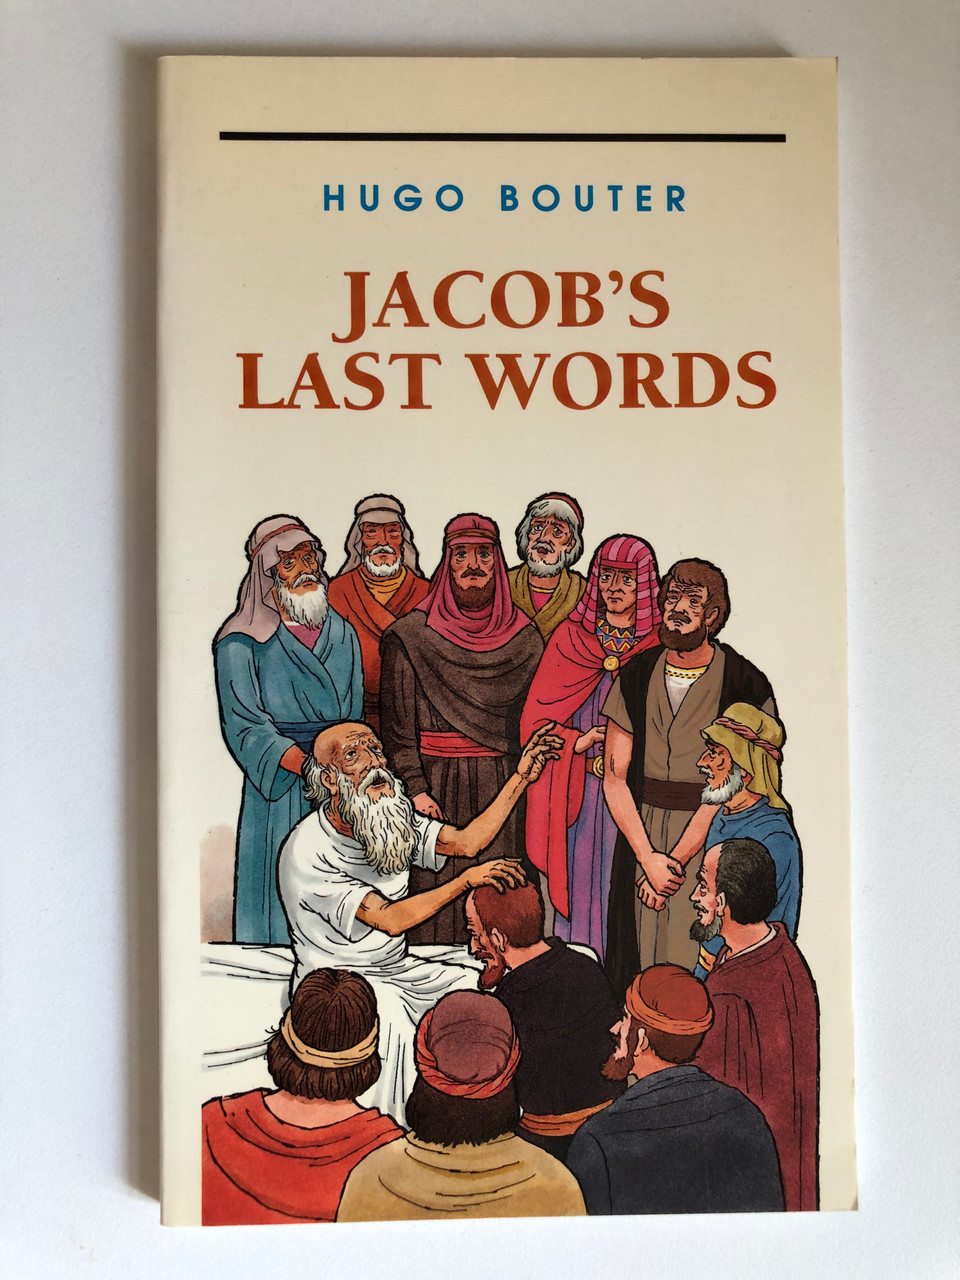 Jacobs_Last_Words_by_Hugo_Bouter_Genesis_49_contains_valuable_lessons_for_individual_believers_Publisher_CHAPTER_TWO-LONDON_2__31694.1691243370.1280.1280.JPG (960×1280)